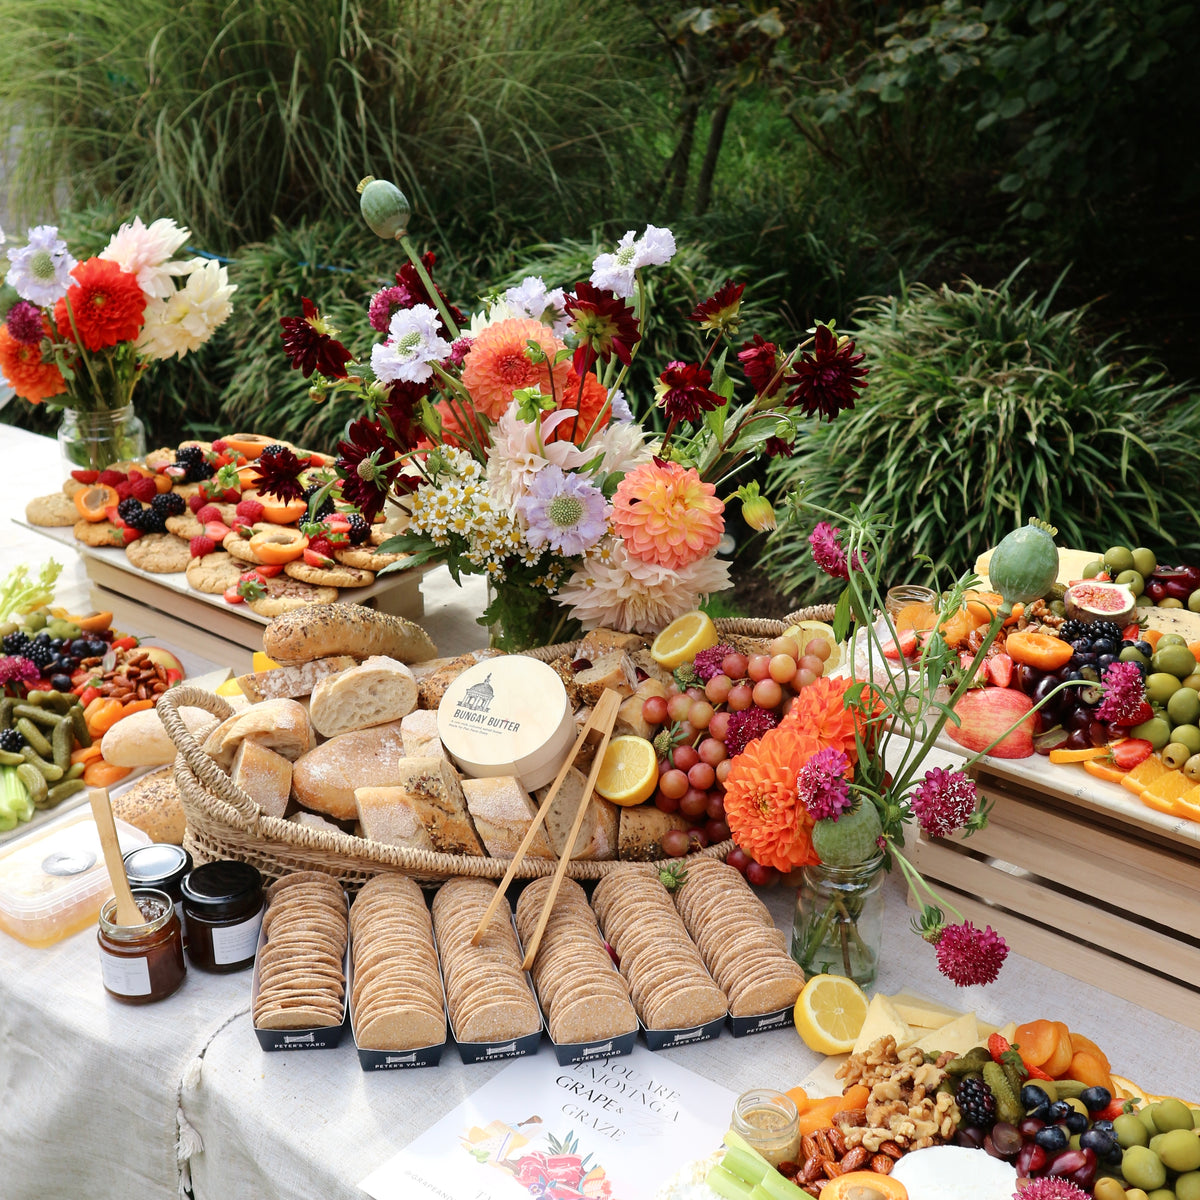 Bespoke Catering Services (from £1.2k)